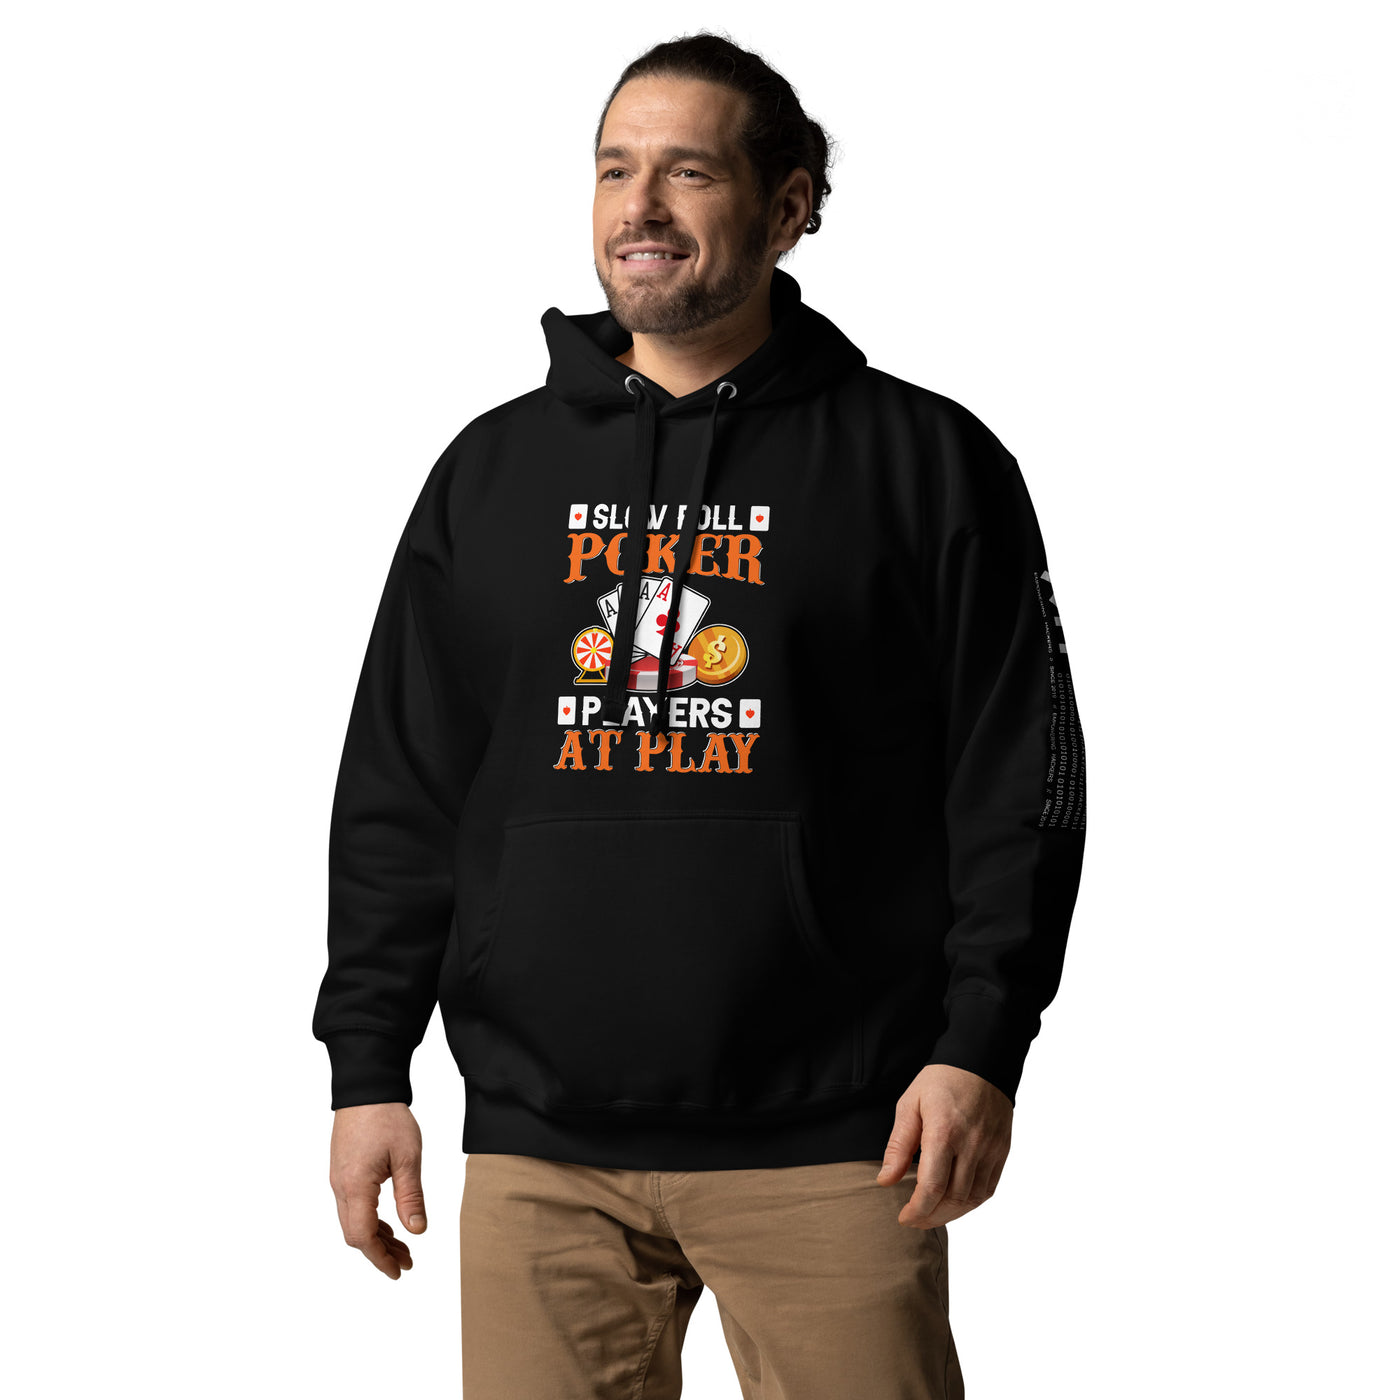 Slow Roll Poker; Players at Play - Unisex Hoodie